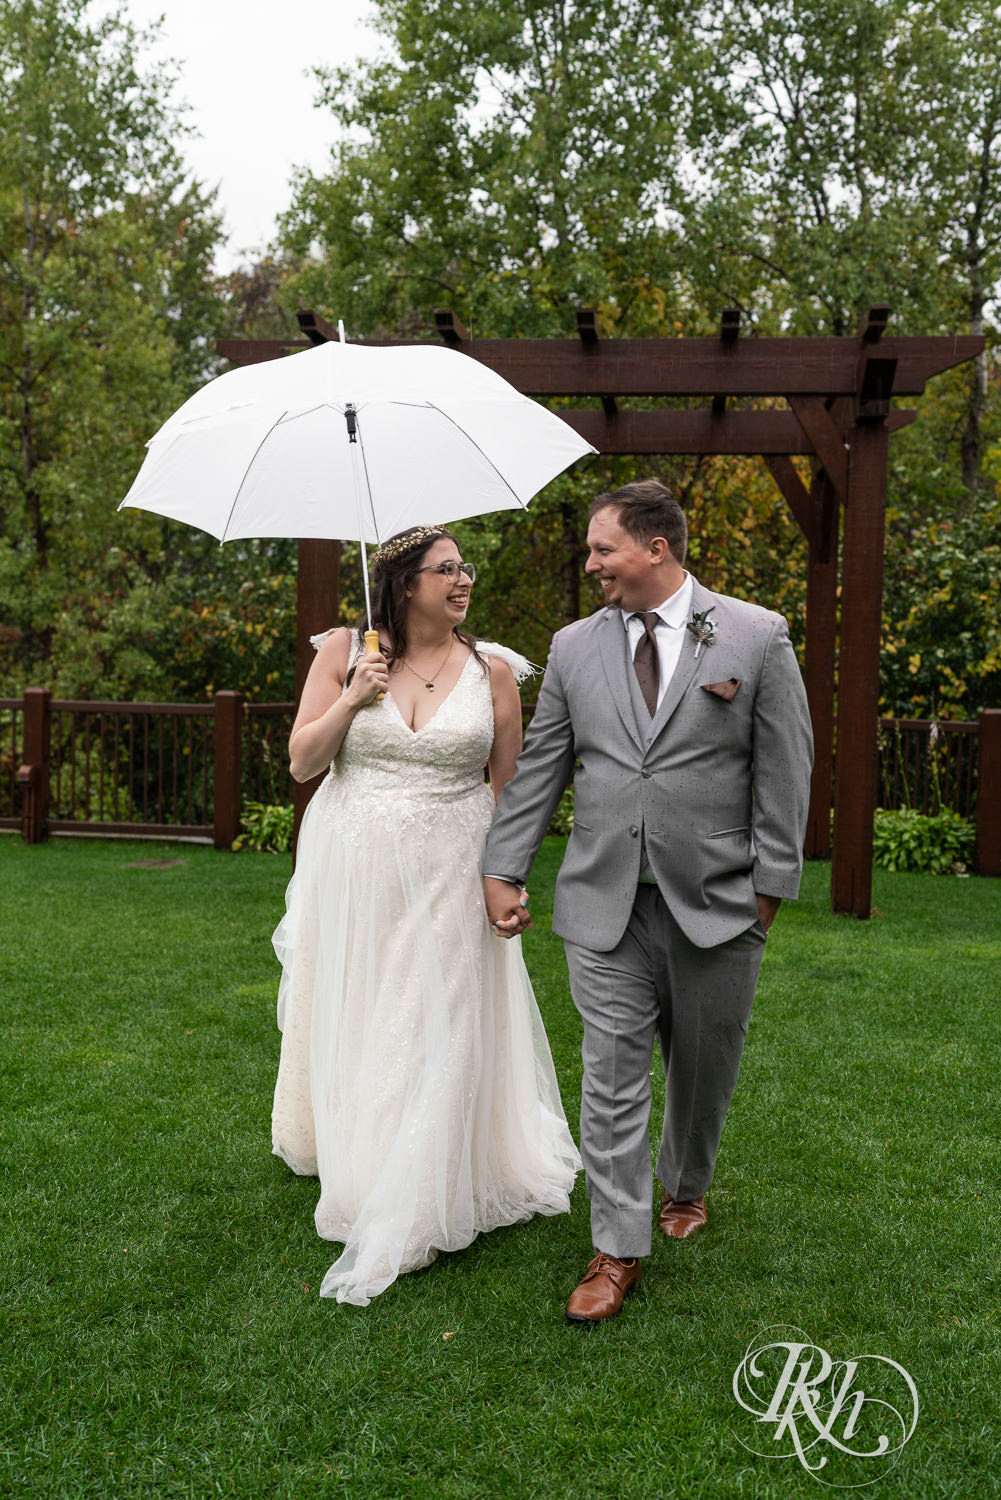 Bride and groom smile under the umbrella during rainy wedding day at Bunker Hills Event Center in Coon Rapids, Minnesota.